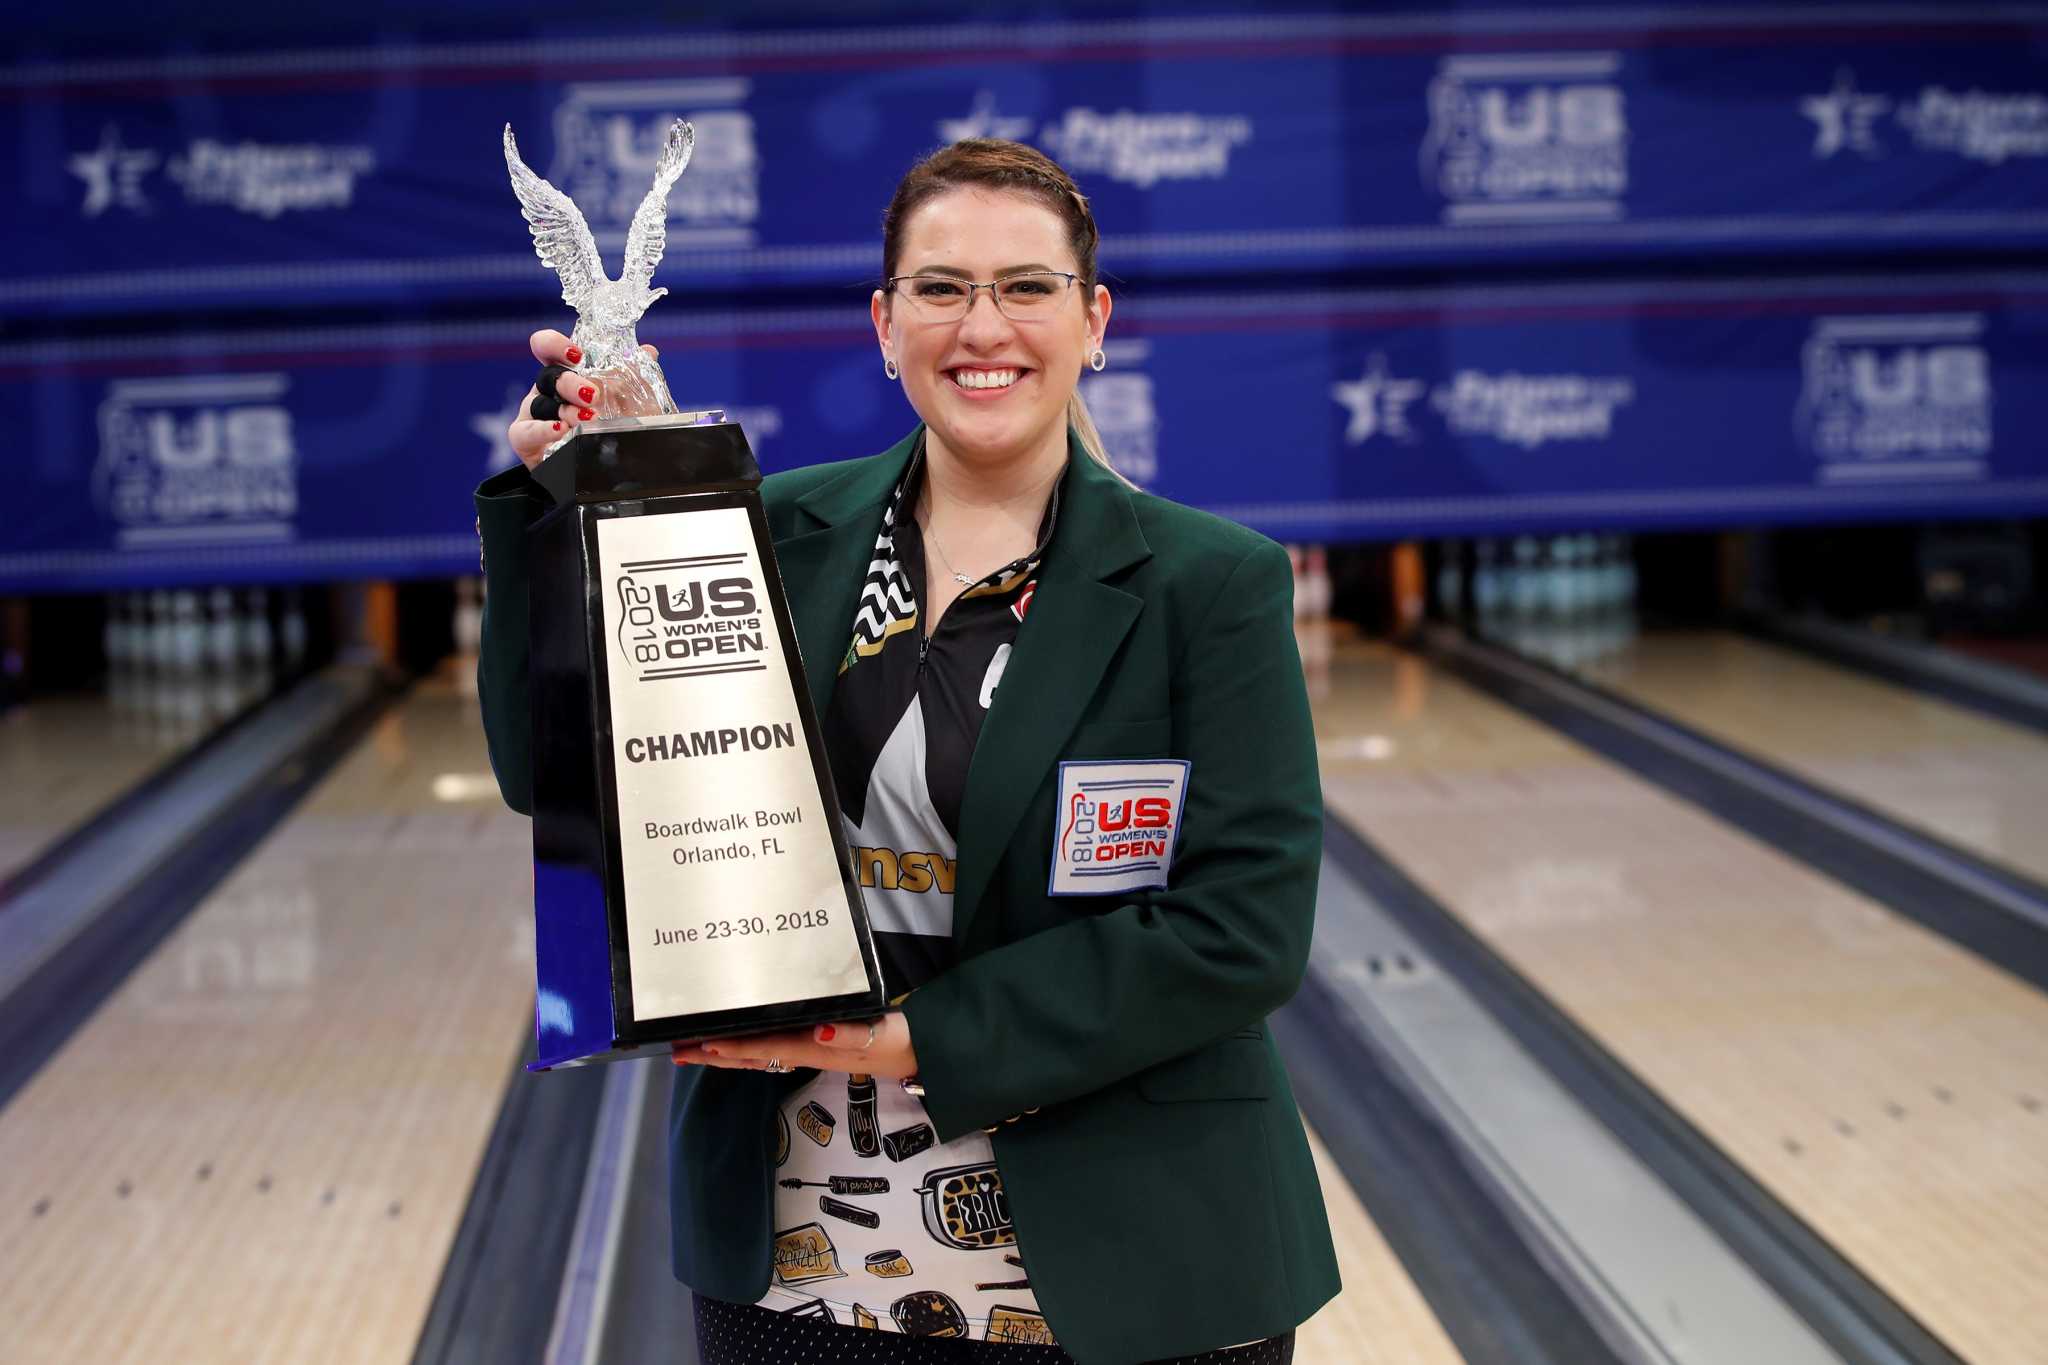 2022 U.S. Women's Open bowling event awarded to Kingpin's Alley